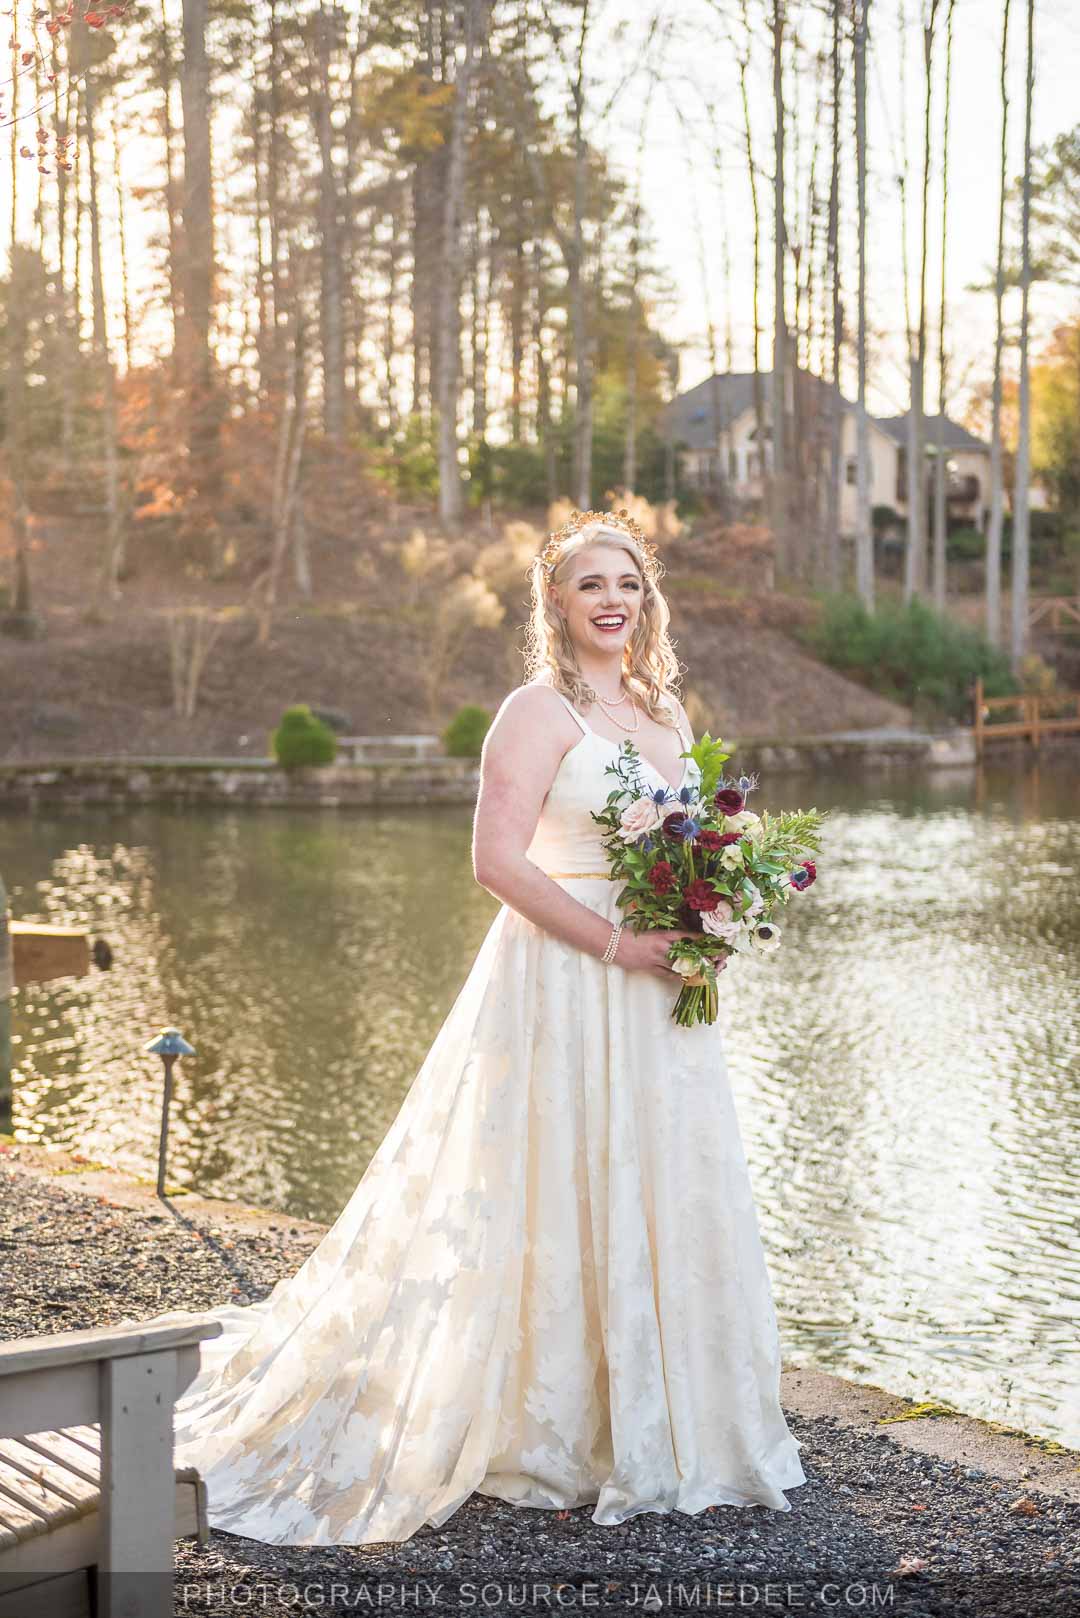 Rocky's Lake Estate Wedding Venue - Bridal Portraits - close up of bride on her wedding day holding bouquet of flowers - full body